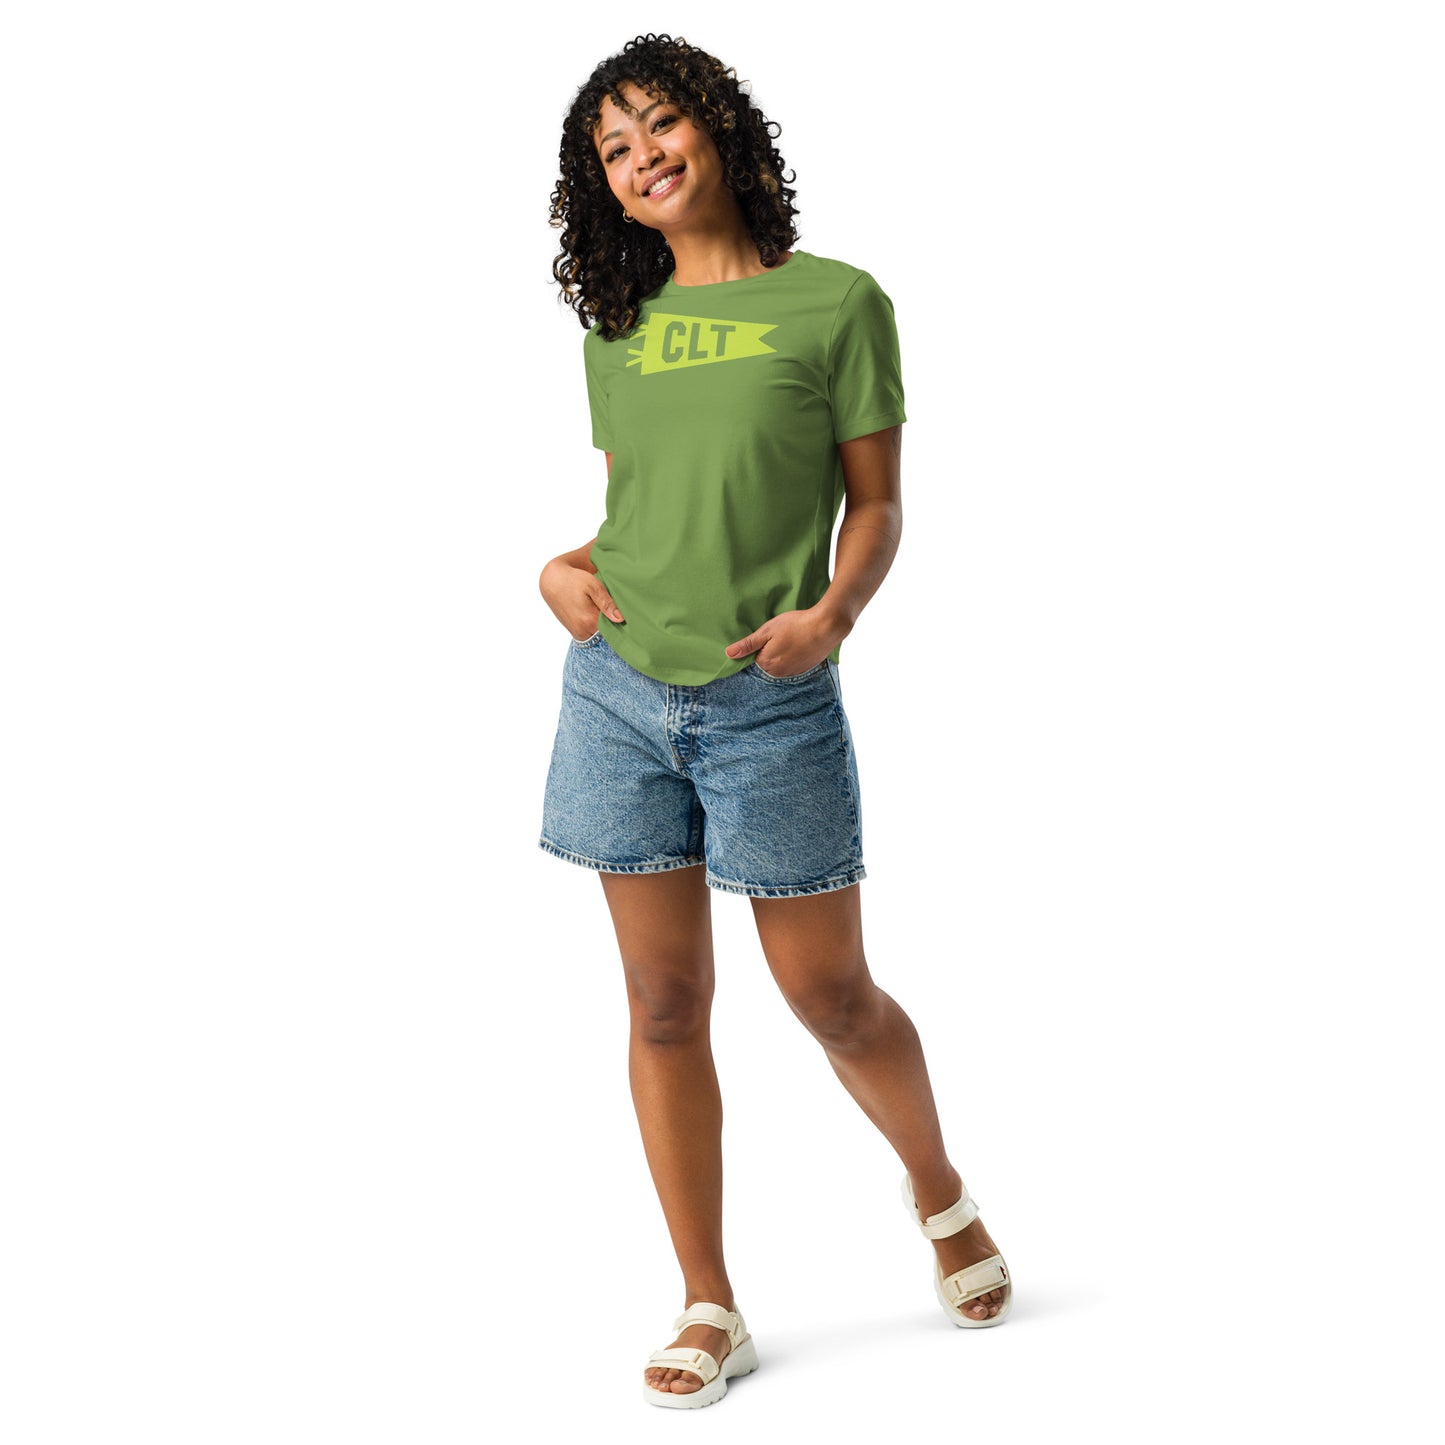 Airport Code Women's Tee - Green Graphic • CLT Charlotte • YHM Designs - Image 08